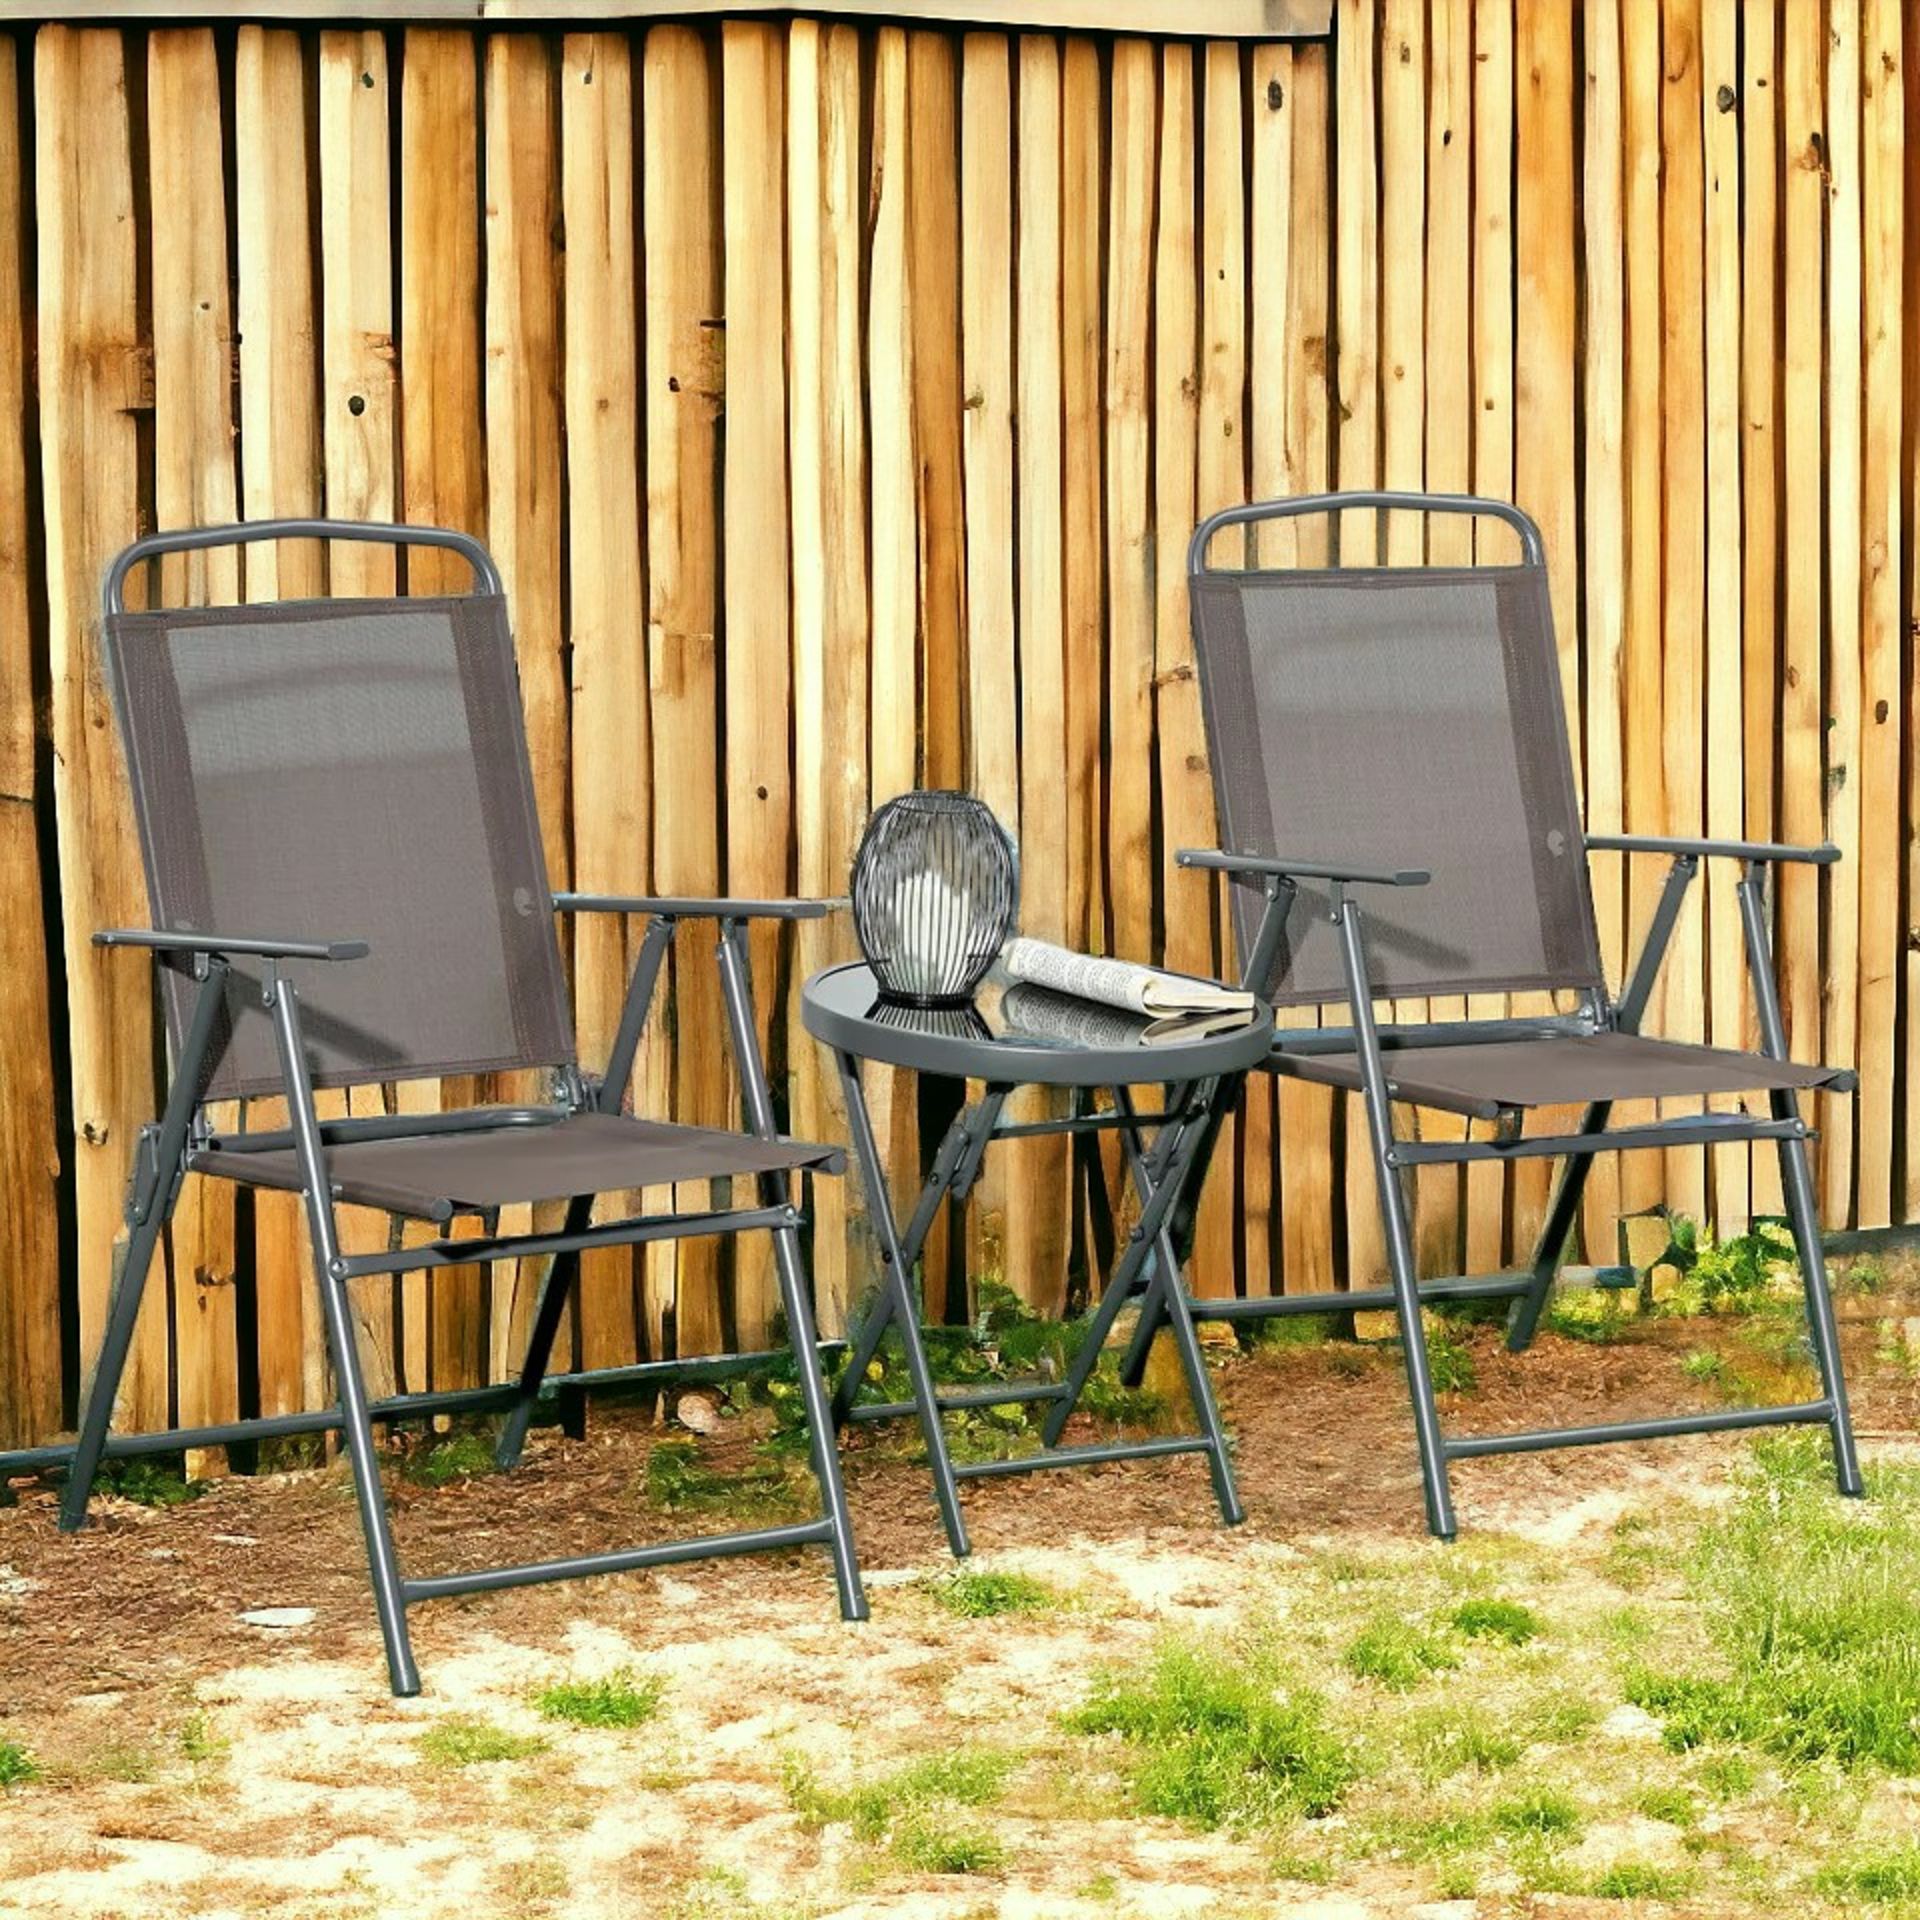 FREE DELIVERY - BRAND NEW PATIO BISTRO SET FOLDING CHAIRS & COFFEE TABLE ,BROWN - Image 2 of 3